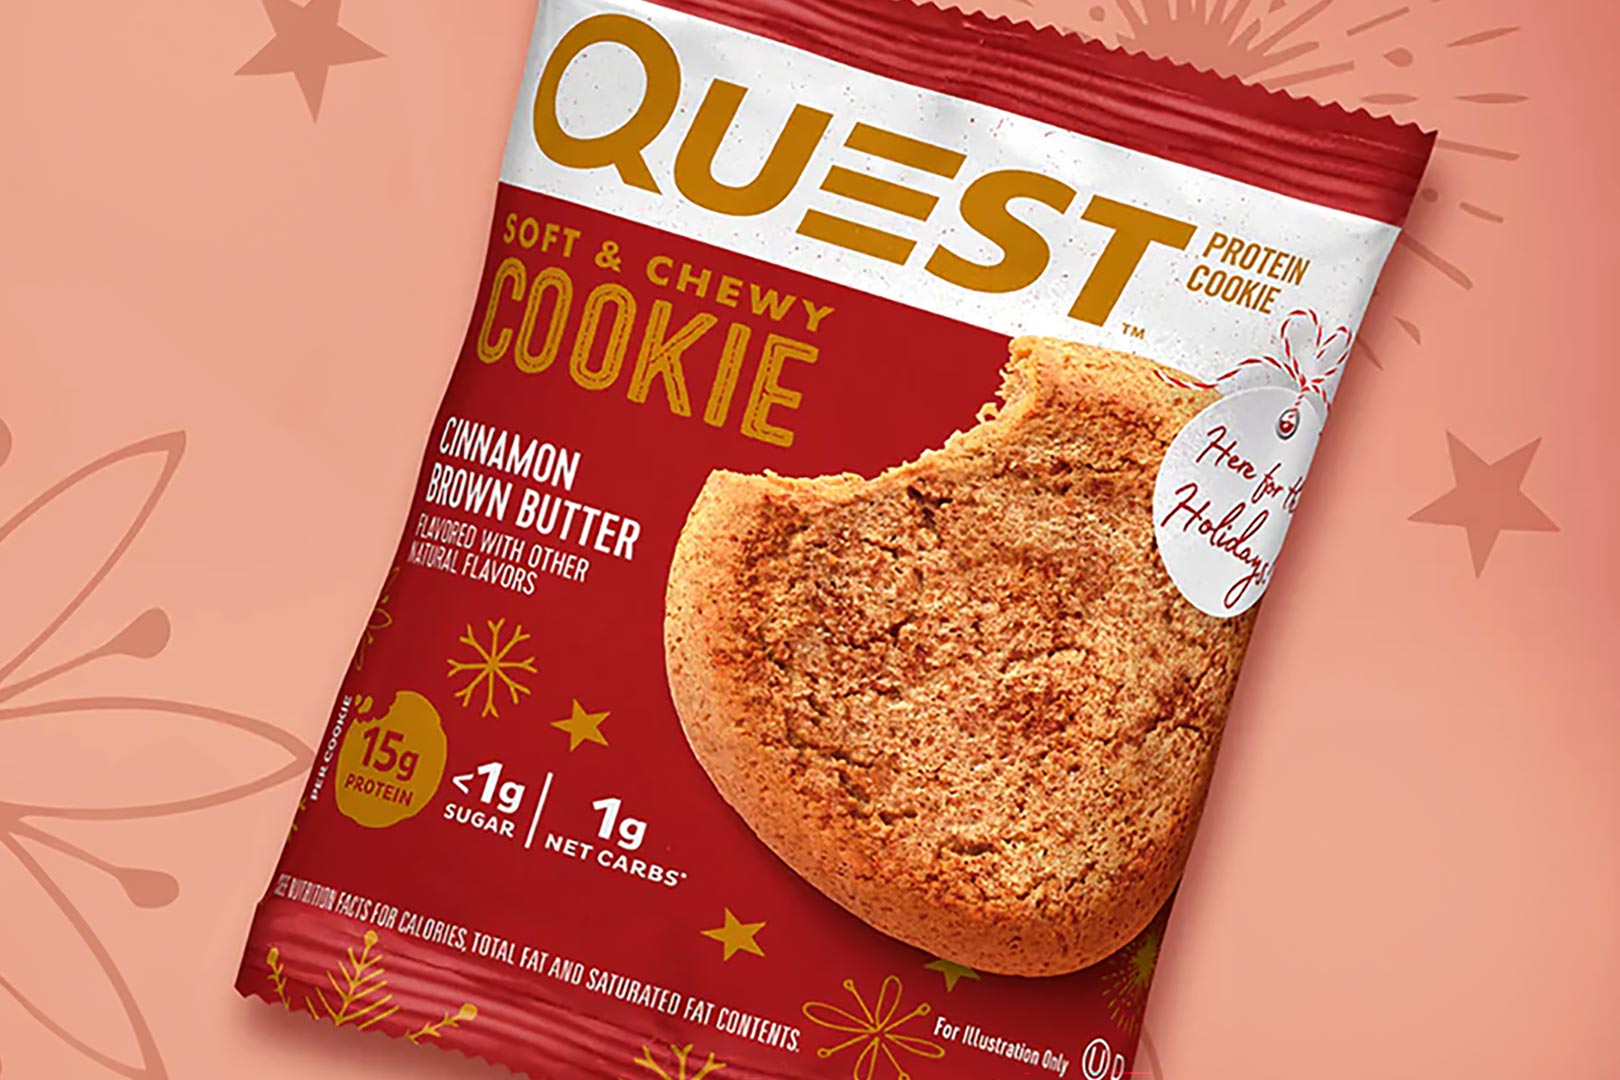 Cinnamon Brown Butter Quest Protein Cookie